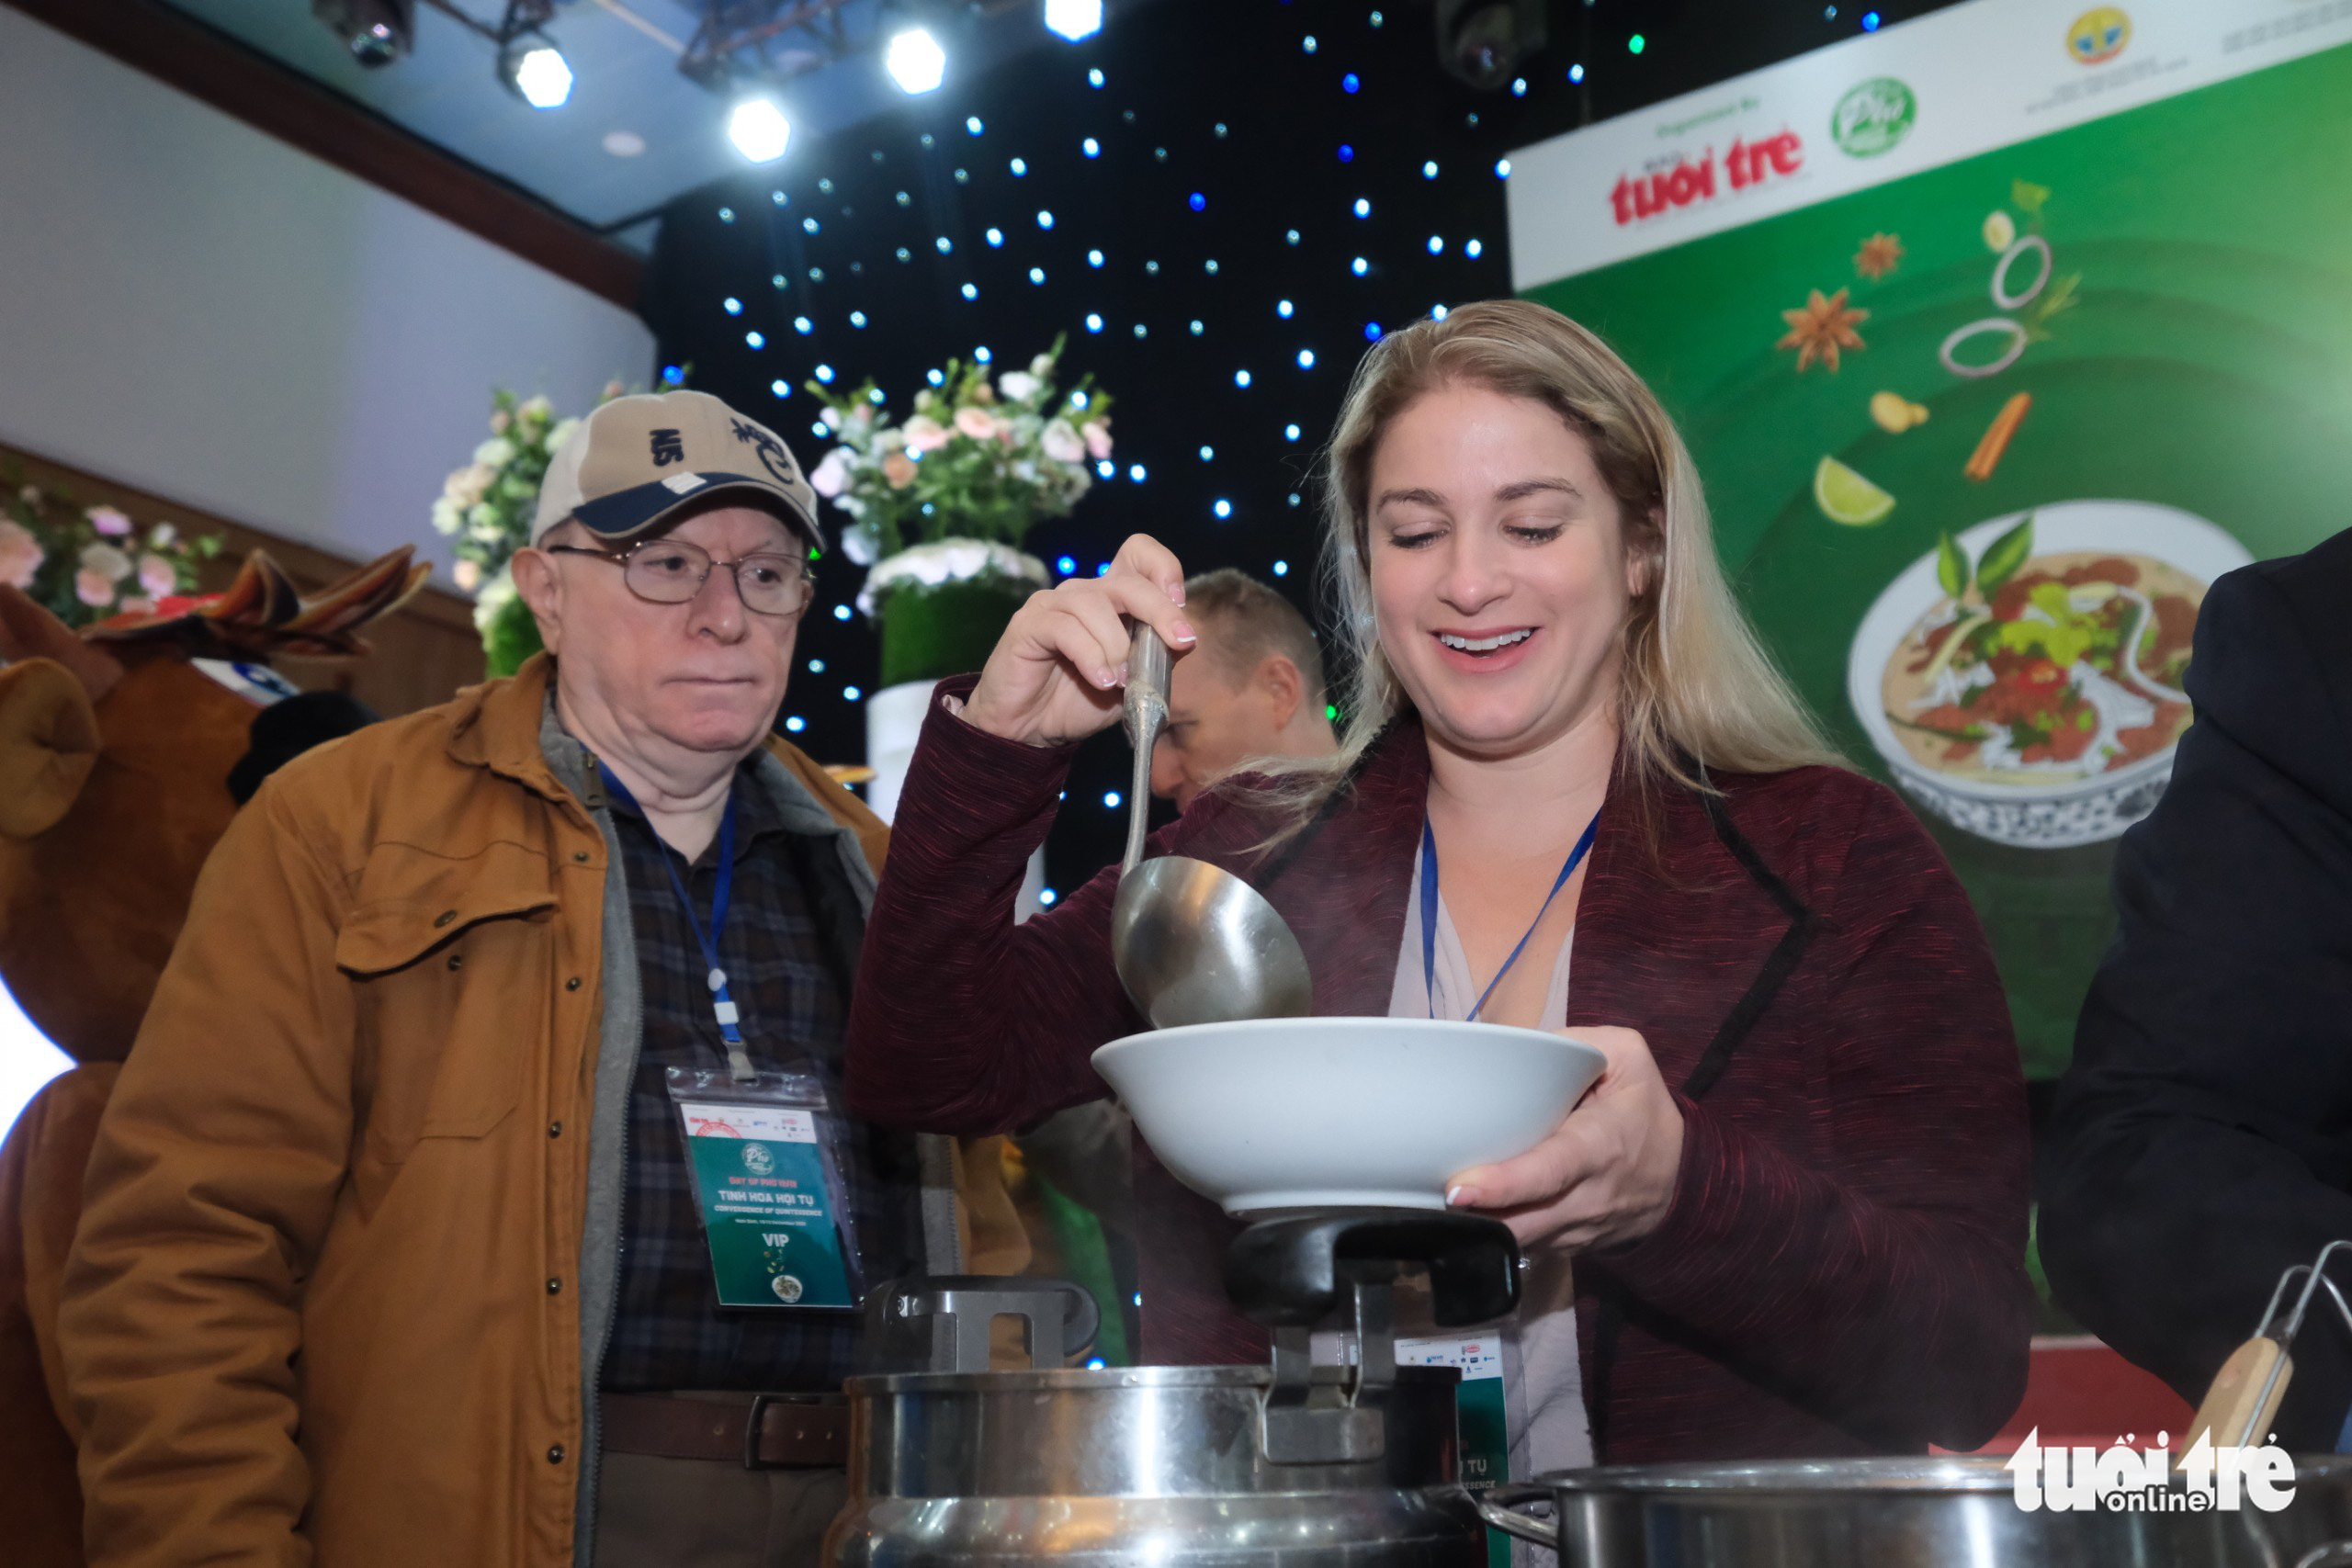 Kate Bartlett (R), Cultural Affairs Attaché at the U.S. Embassy in Vietnam, experiences pho at the Day of Pho event organized by Tuoi Tre (Youth) newspaper in Nam Dinh Province, Vietnam, December 10, 2022. Photo: Nam Tran / Tuoi Tre